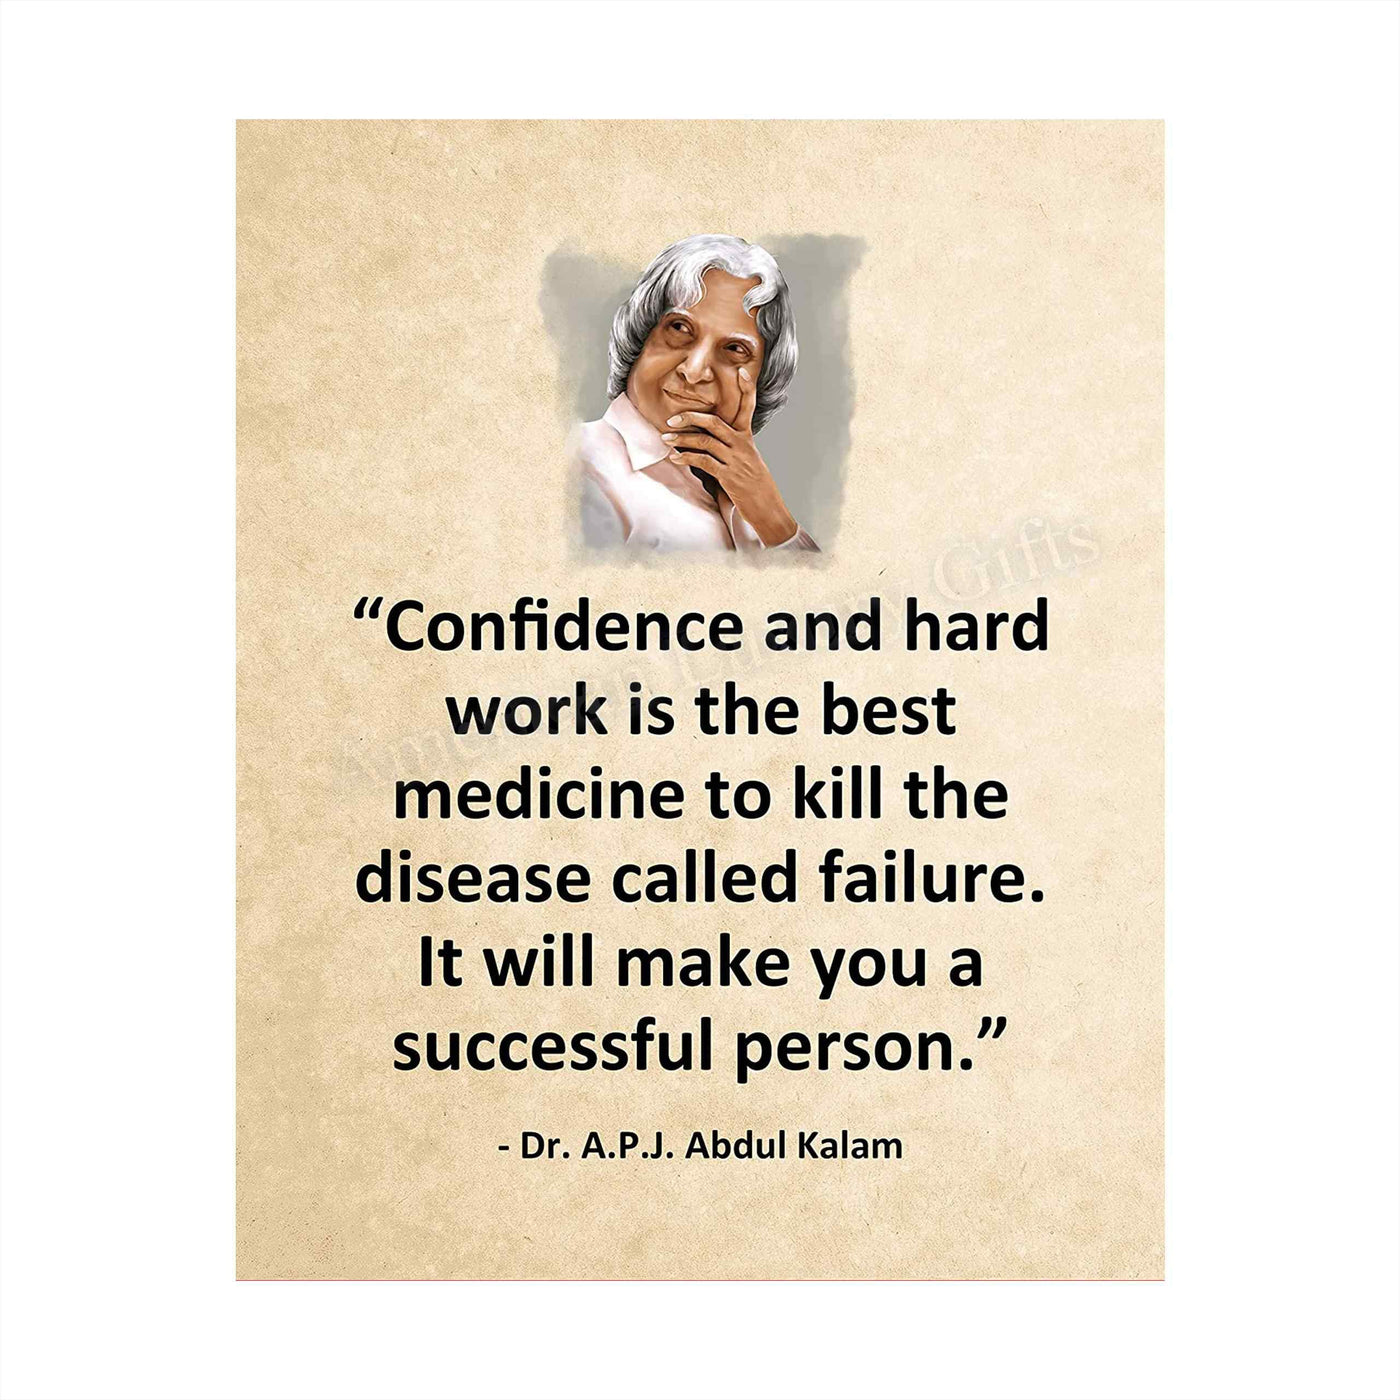 Confidence and Hard Work Will Make You Successful Motivational Quotes Wall Sign -8 x 10" Inspirational Wall Art Print-Ready to Frame. Positive Home-Office-School-Dorm Decor. Great Sign for Success!